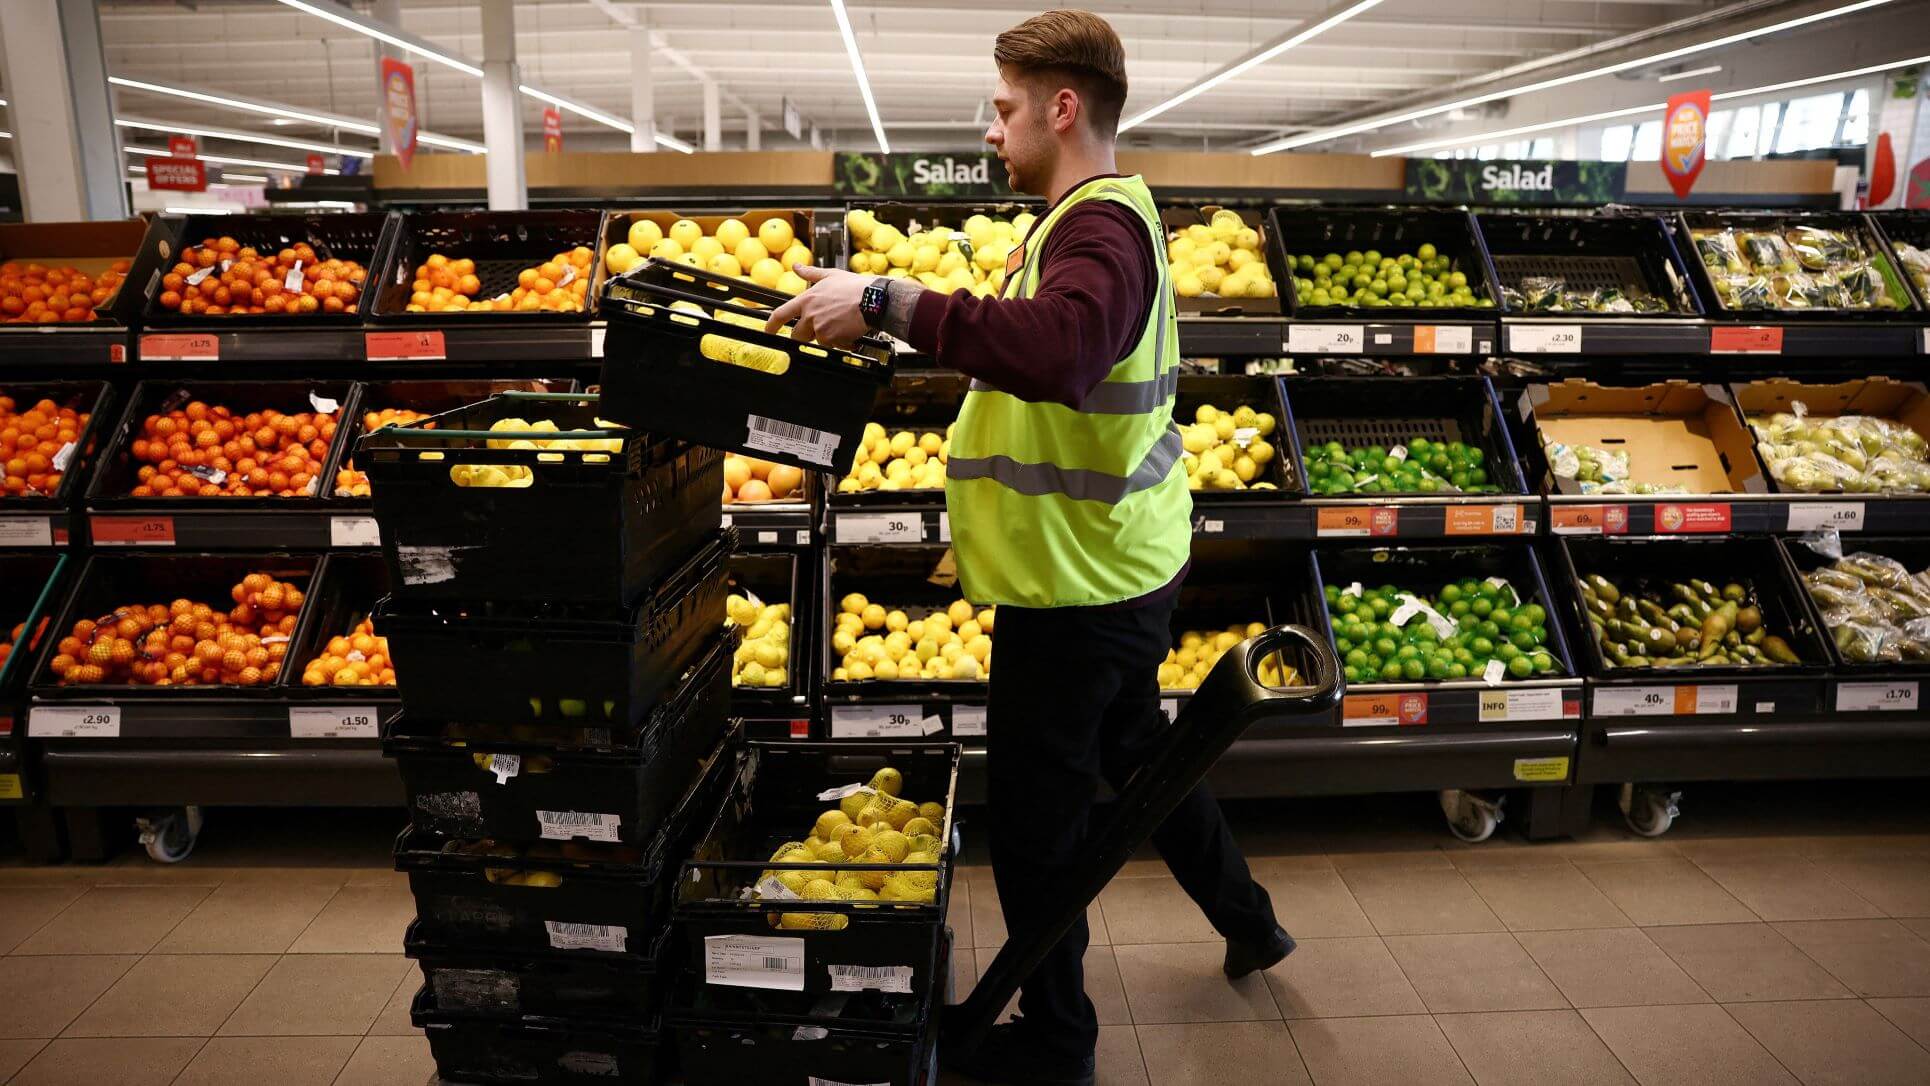 UK Shop Price Inflation Jumps To 4.4% In July - BRC